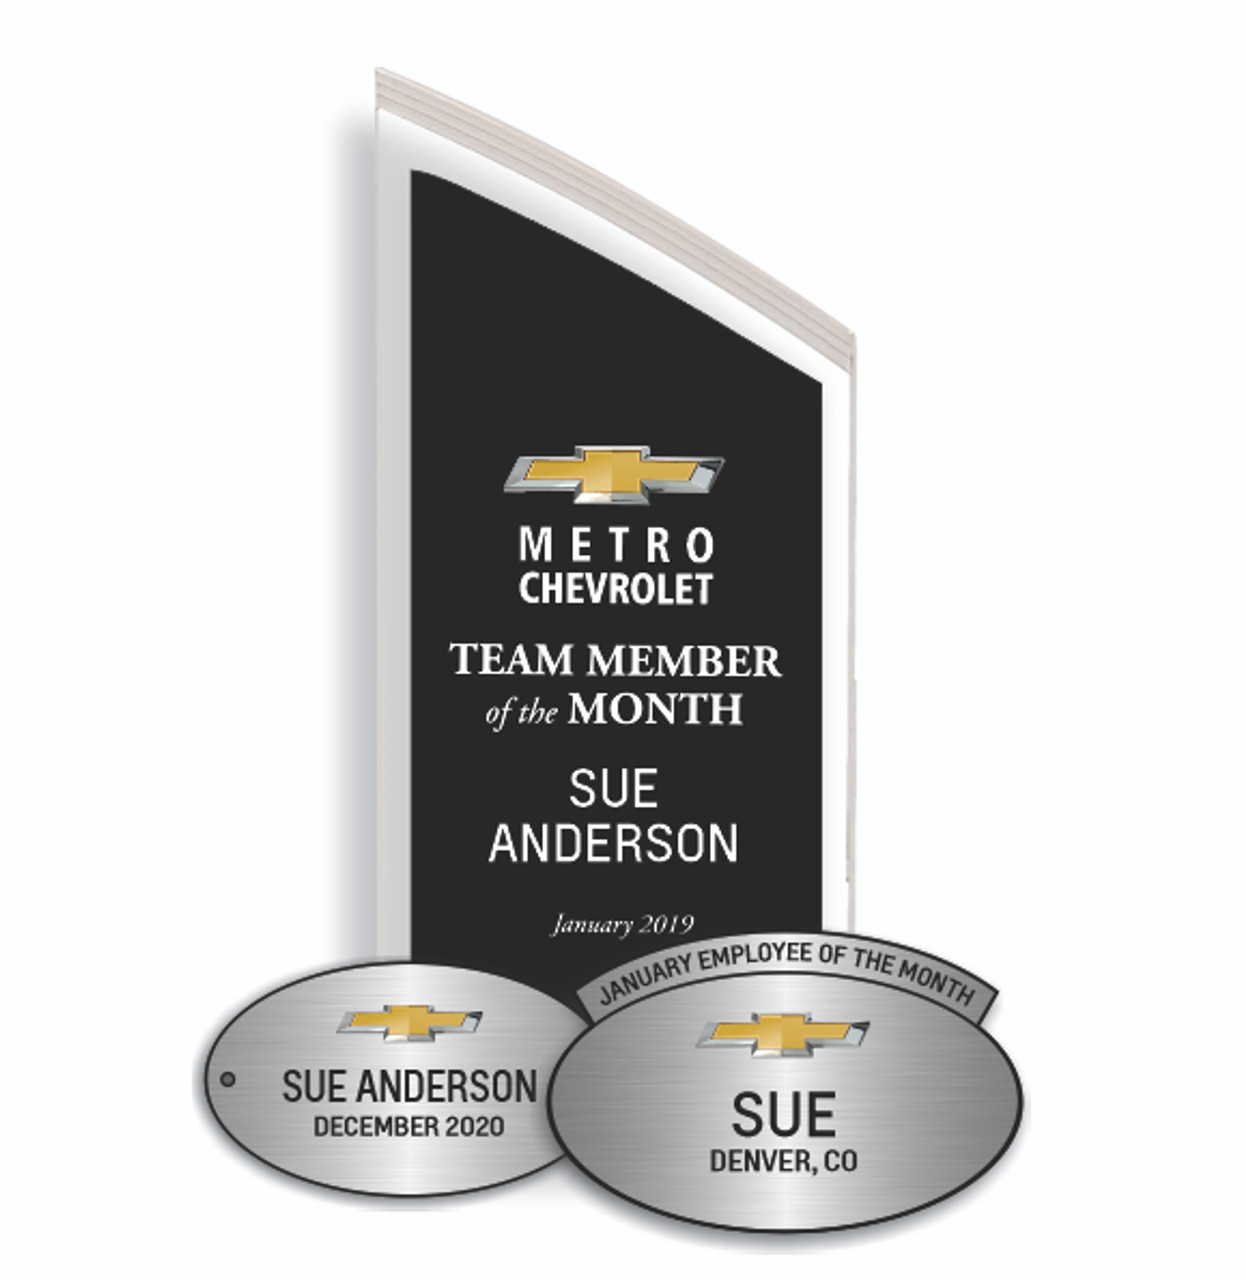 12 Month "PREMIUM REFILL" Employee Recognition Award Package